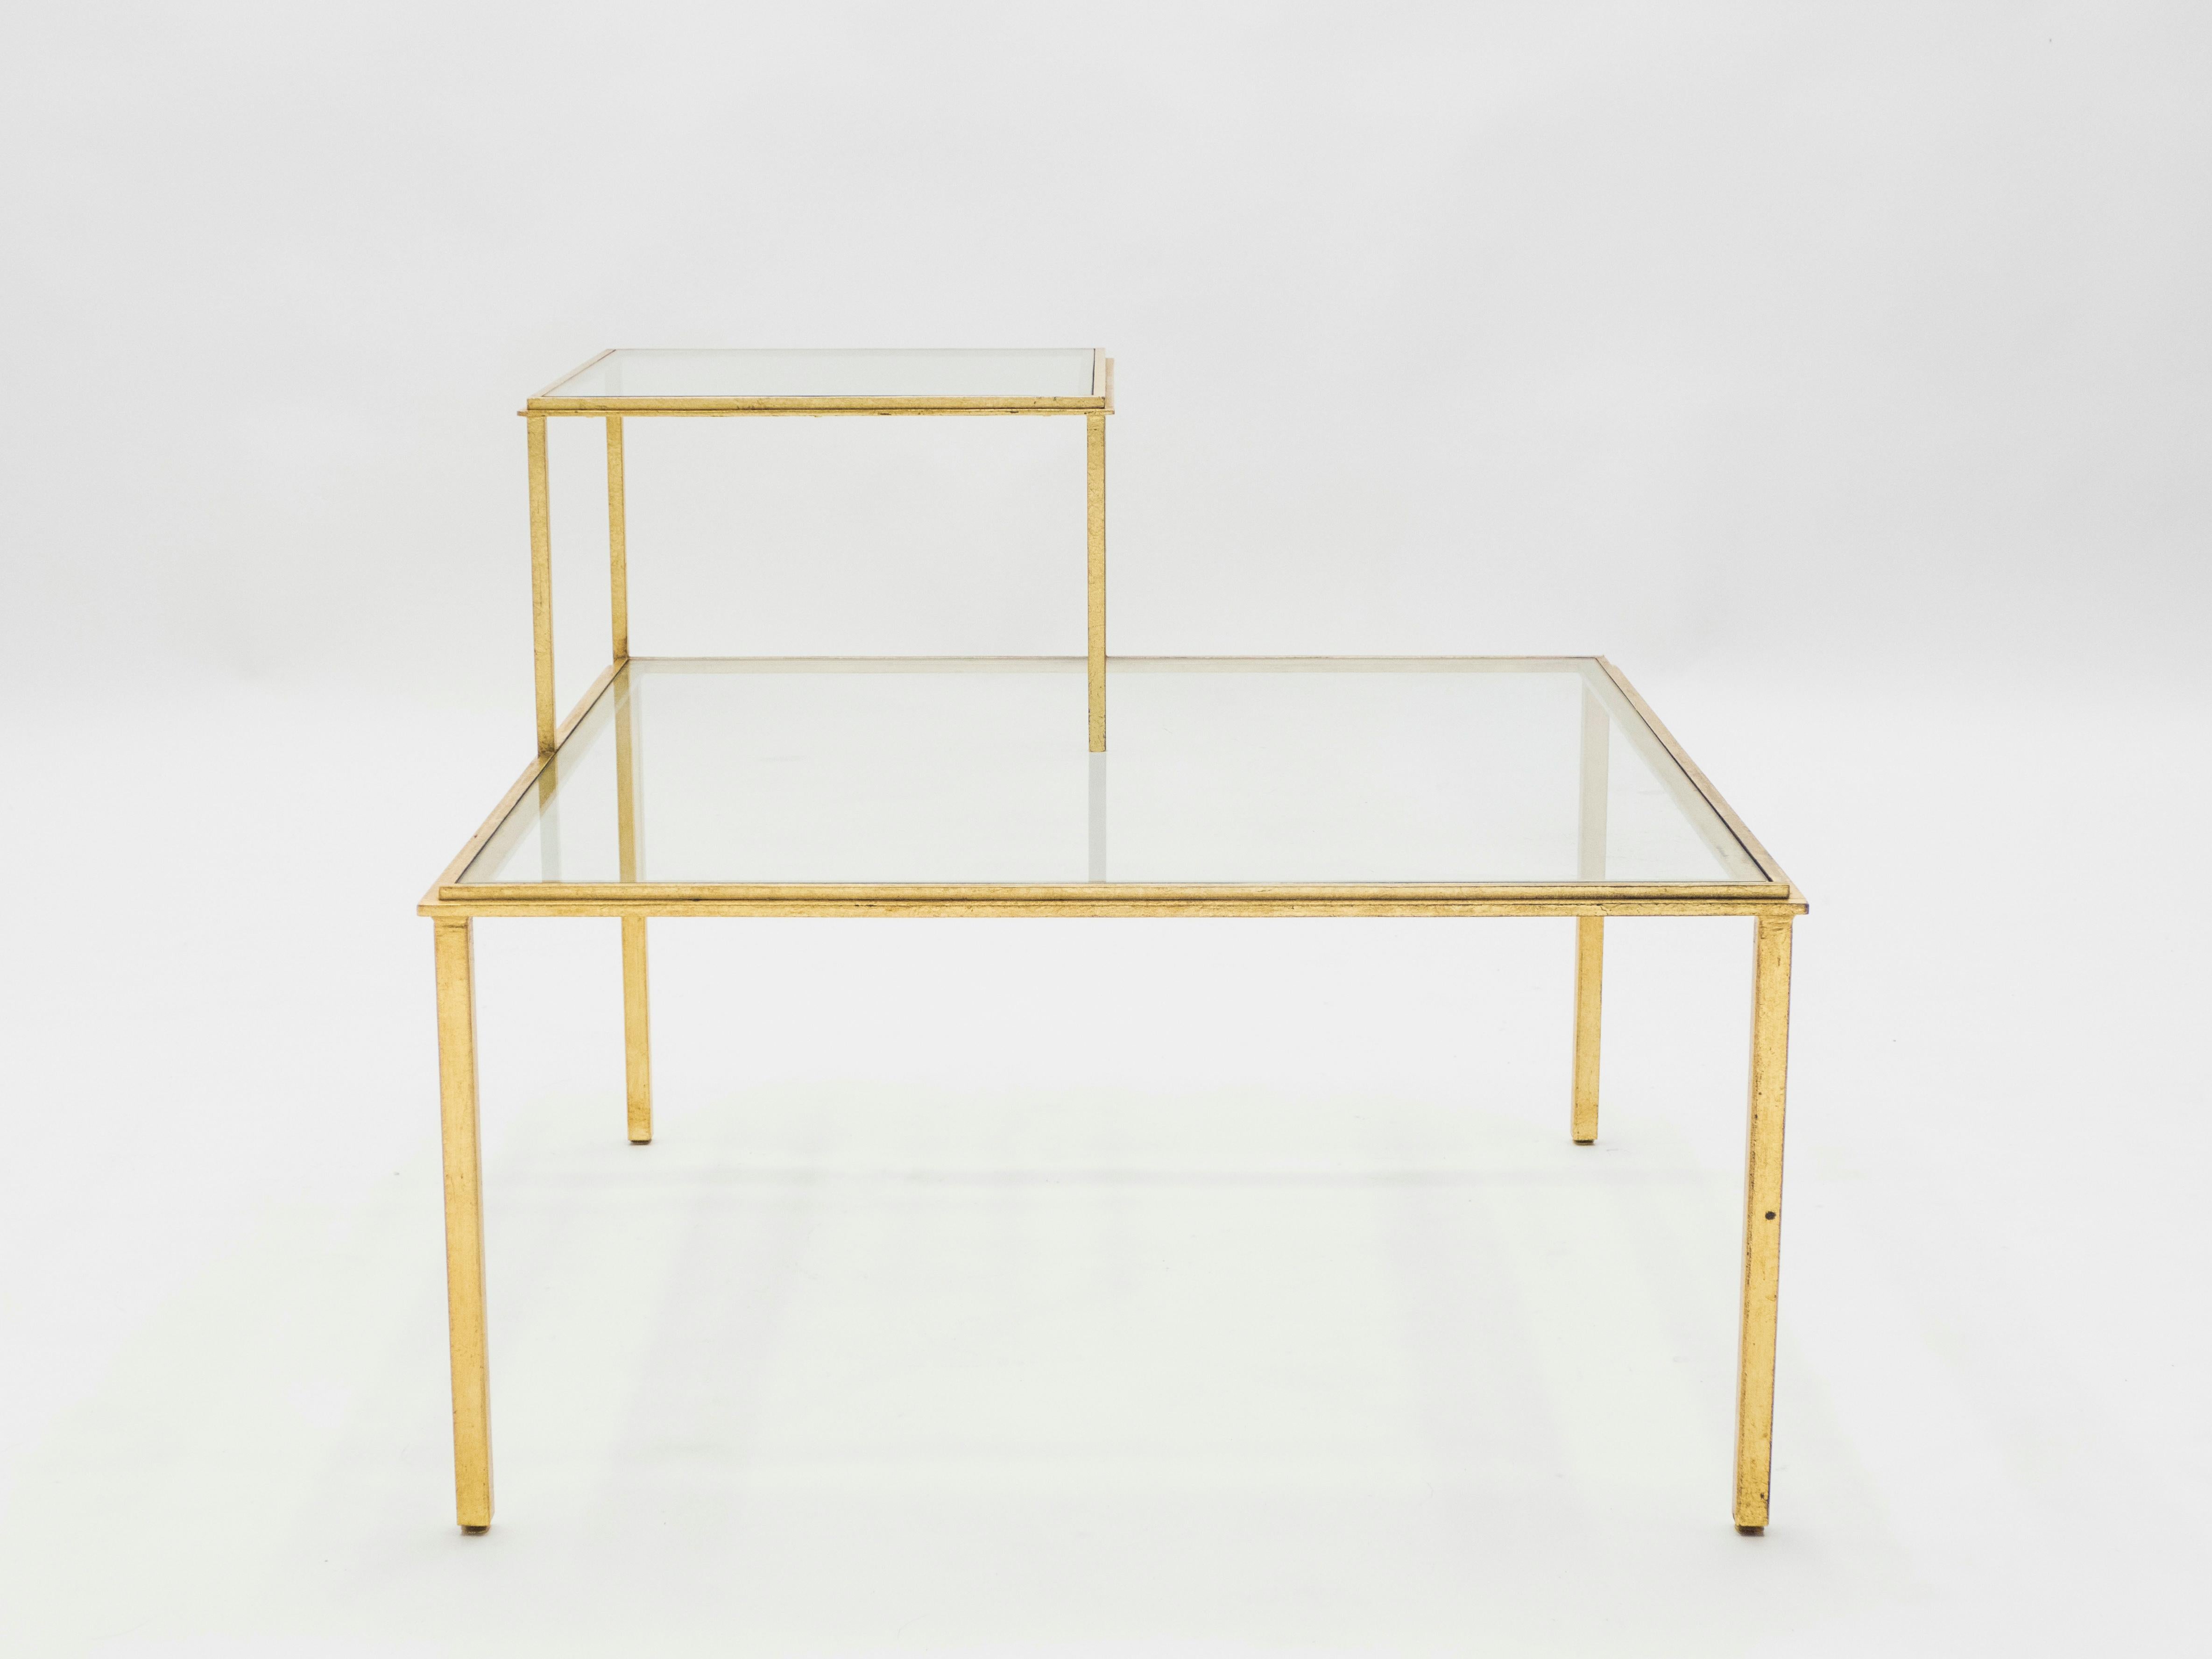 Grace your home with the true elegance of this coffee table or large end table signed and stamped by Roger and Robert Thibier in the 1960s. Glittering in an antiqued gold gilt finish, this original two-tier iron craft coffee table adds a glam twist